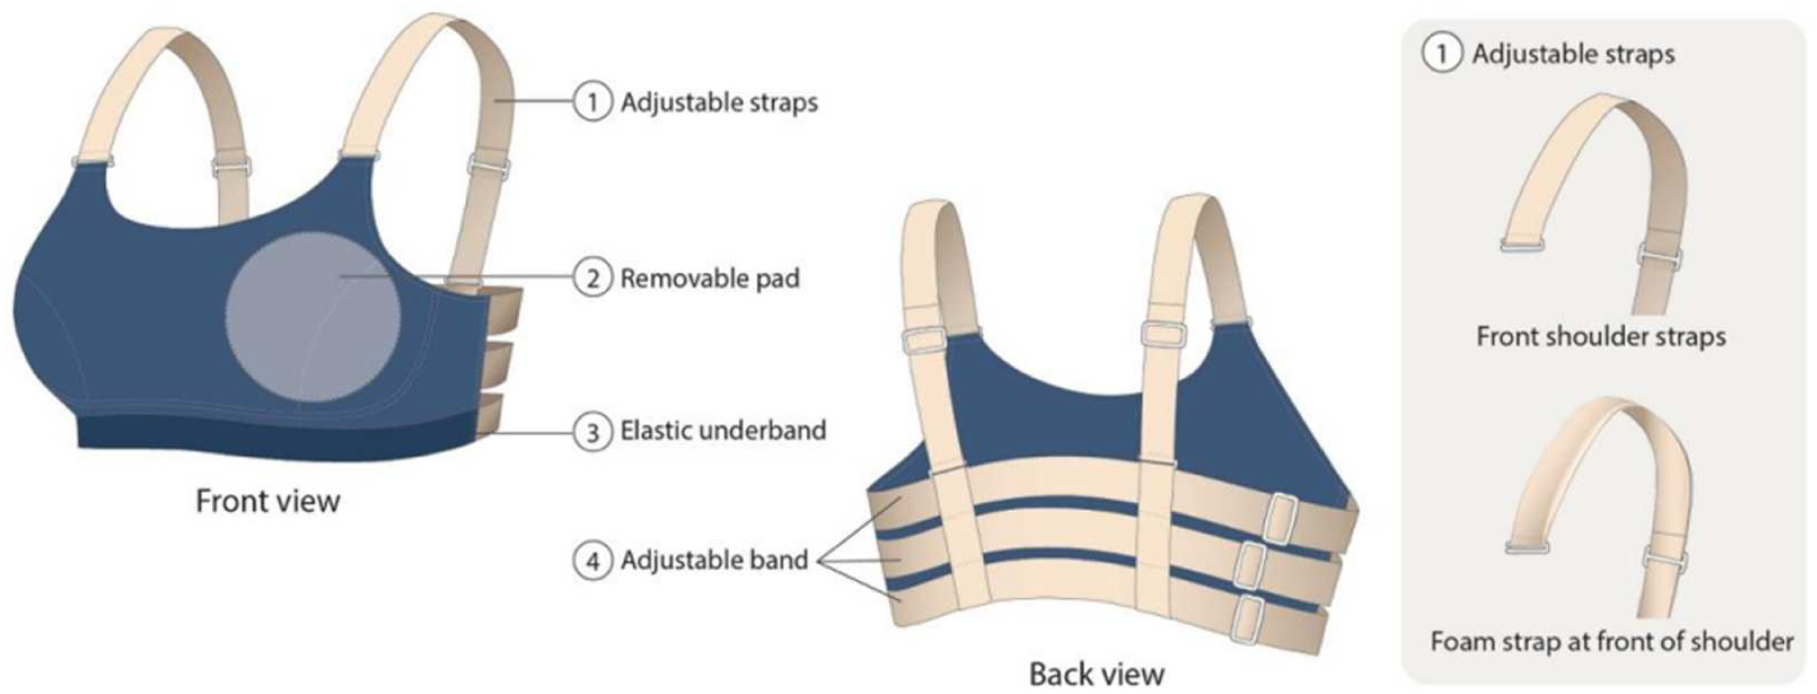 How Does Wearing the Right Sports Bra Help Performance?